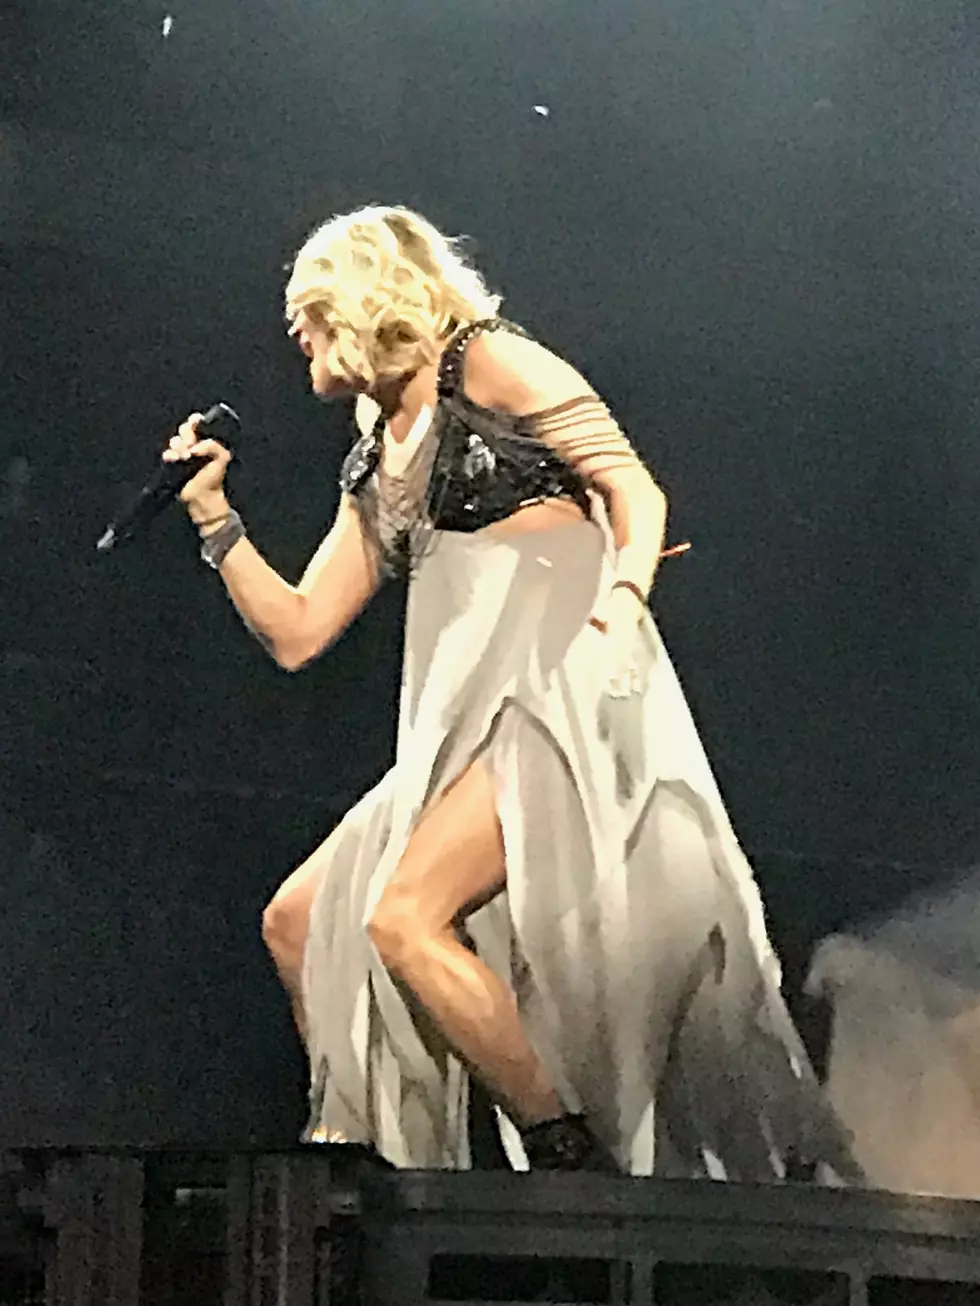 B105 Listener Says Carrie Underwood Dazzled Monday Night at Xcel Energy Center [REVIEW]